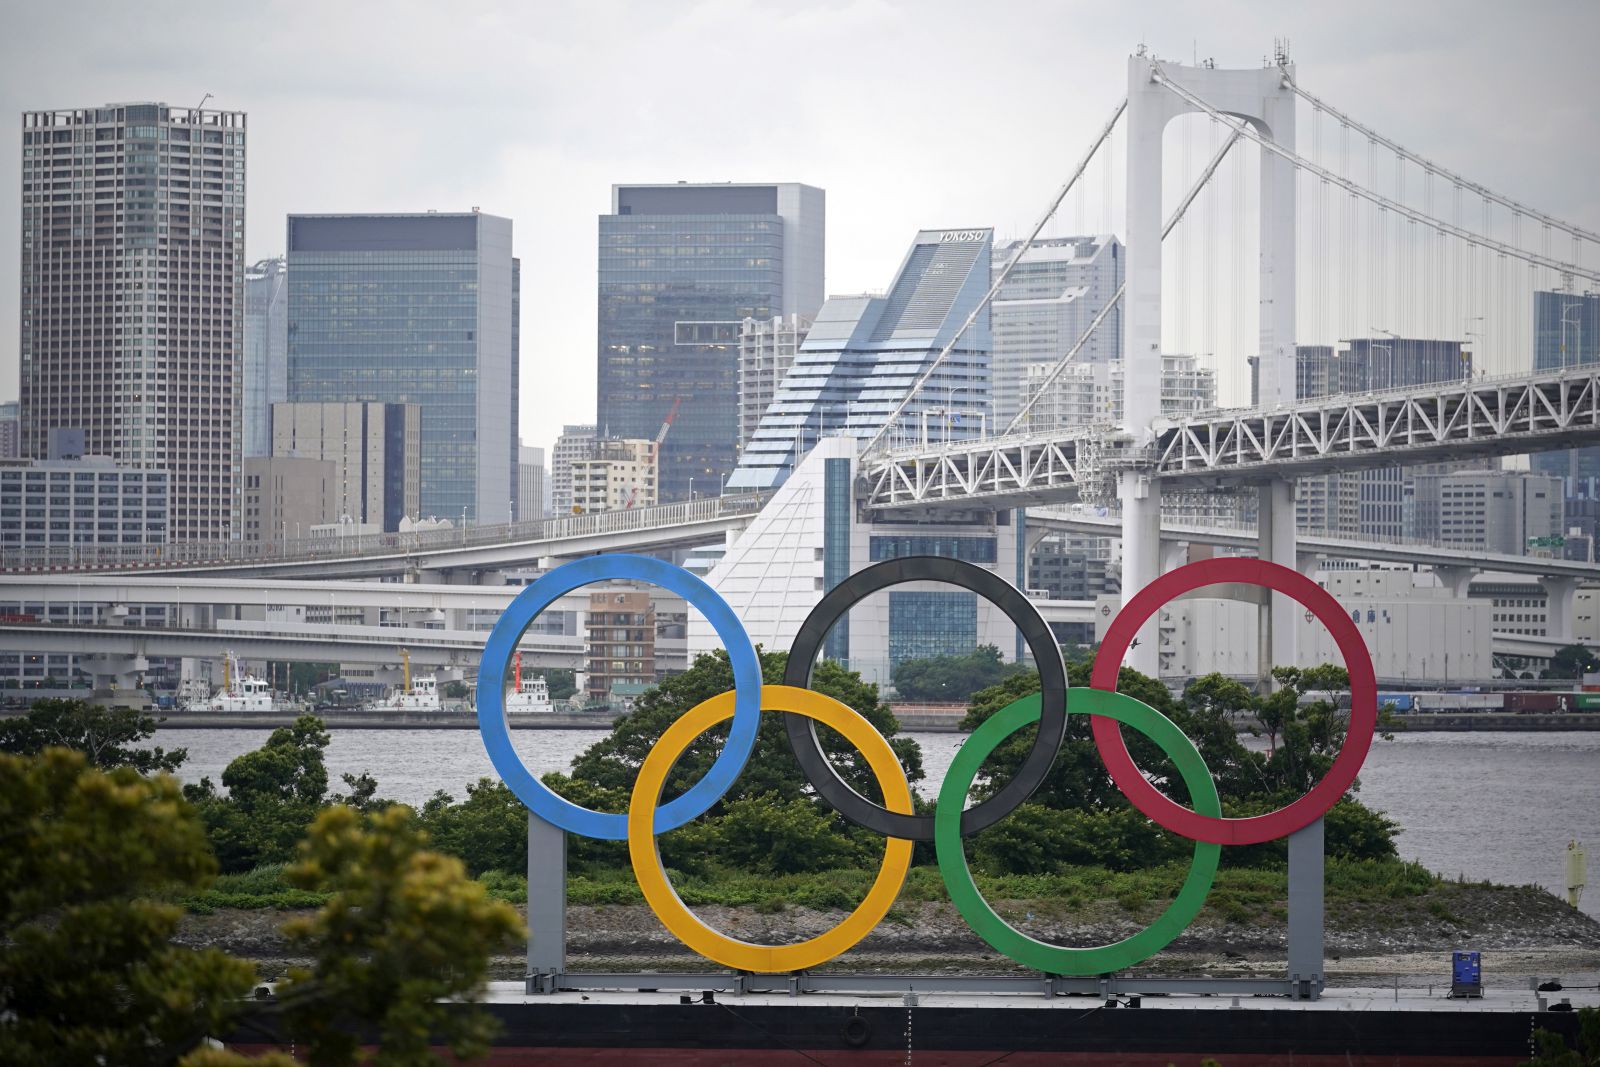 epa09246736 A giant Olympic rings monument is seen at Odaiba Marine Park in Tokyo, Japan, 03 June 2021 (issued 04 June 2021). Tamayo Marukawa, the minister in charge of the Tokyo Olympics, announced on 04 June that a reception for overseas officials planned to be hosted by Prime Minister Yoshihide Suga on 08 August 2021, the last day of the Tokyo Olympics, has been canceled to avoid spread of COVID-19 cases.  EPA/FRANCK ROBICHON